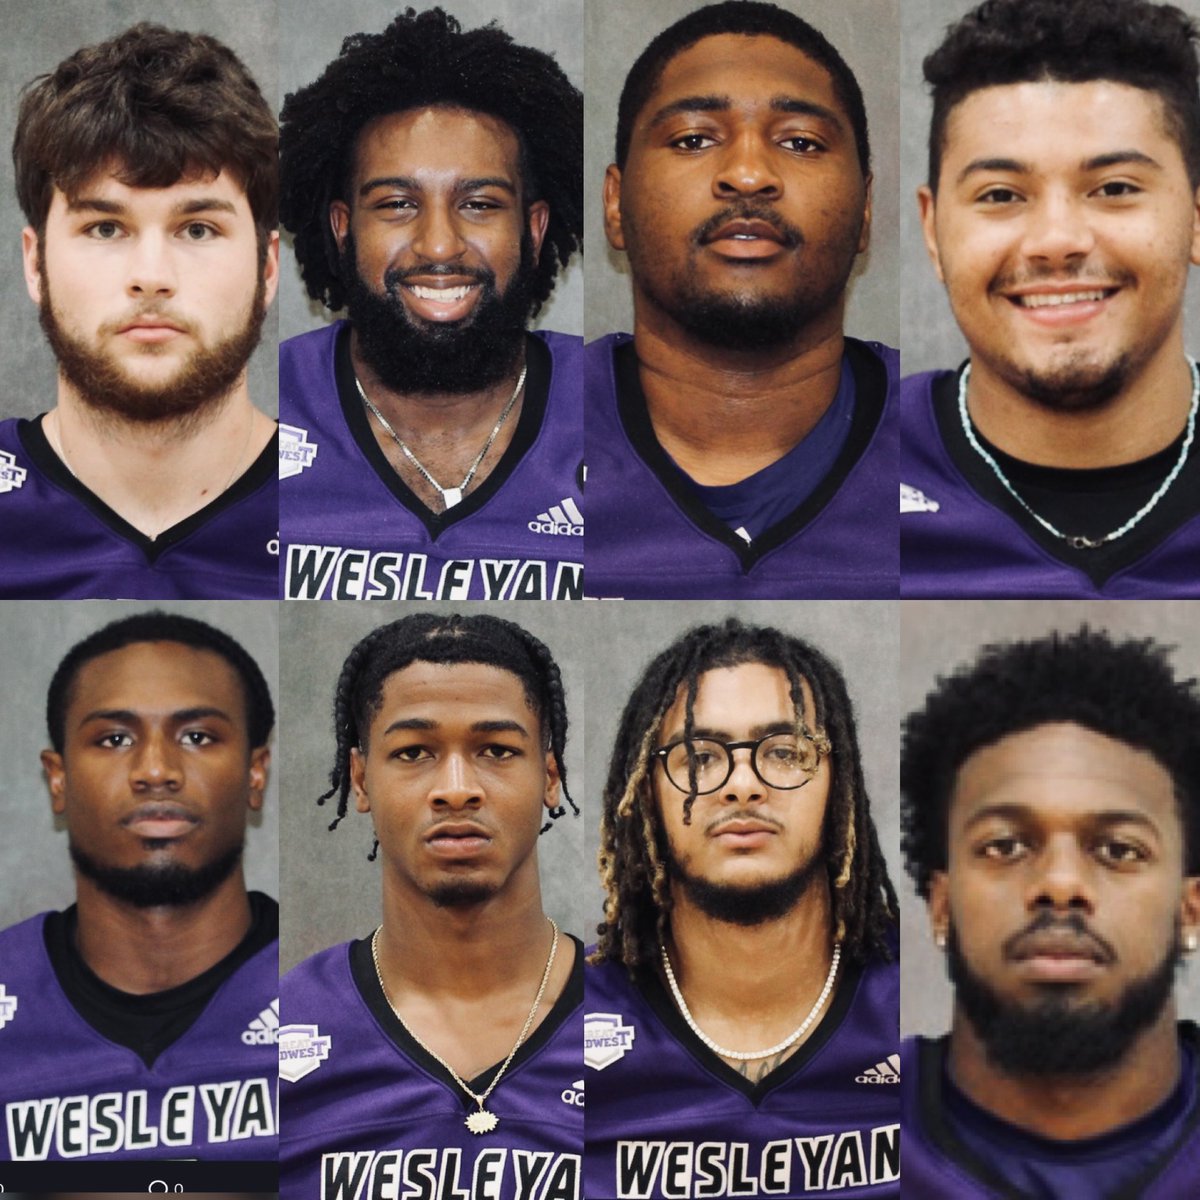 Man, when they say time flies they mean it. What these 8 guys have meant to me personally & the impact they’ve had in building a defensive culture while leaving their legacy is beyond words. I’m grateful for their belief in the SWARM but mostly in THEMSELVES! #OneLastRide #Family